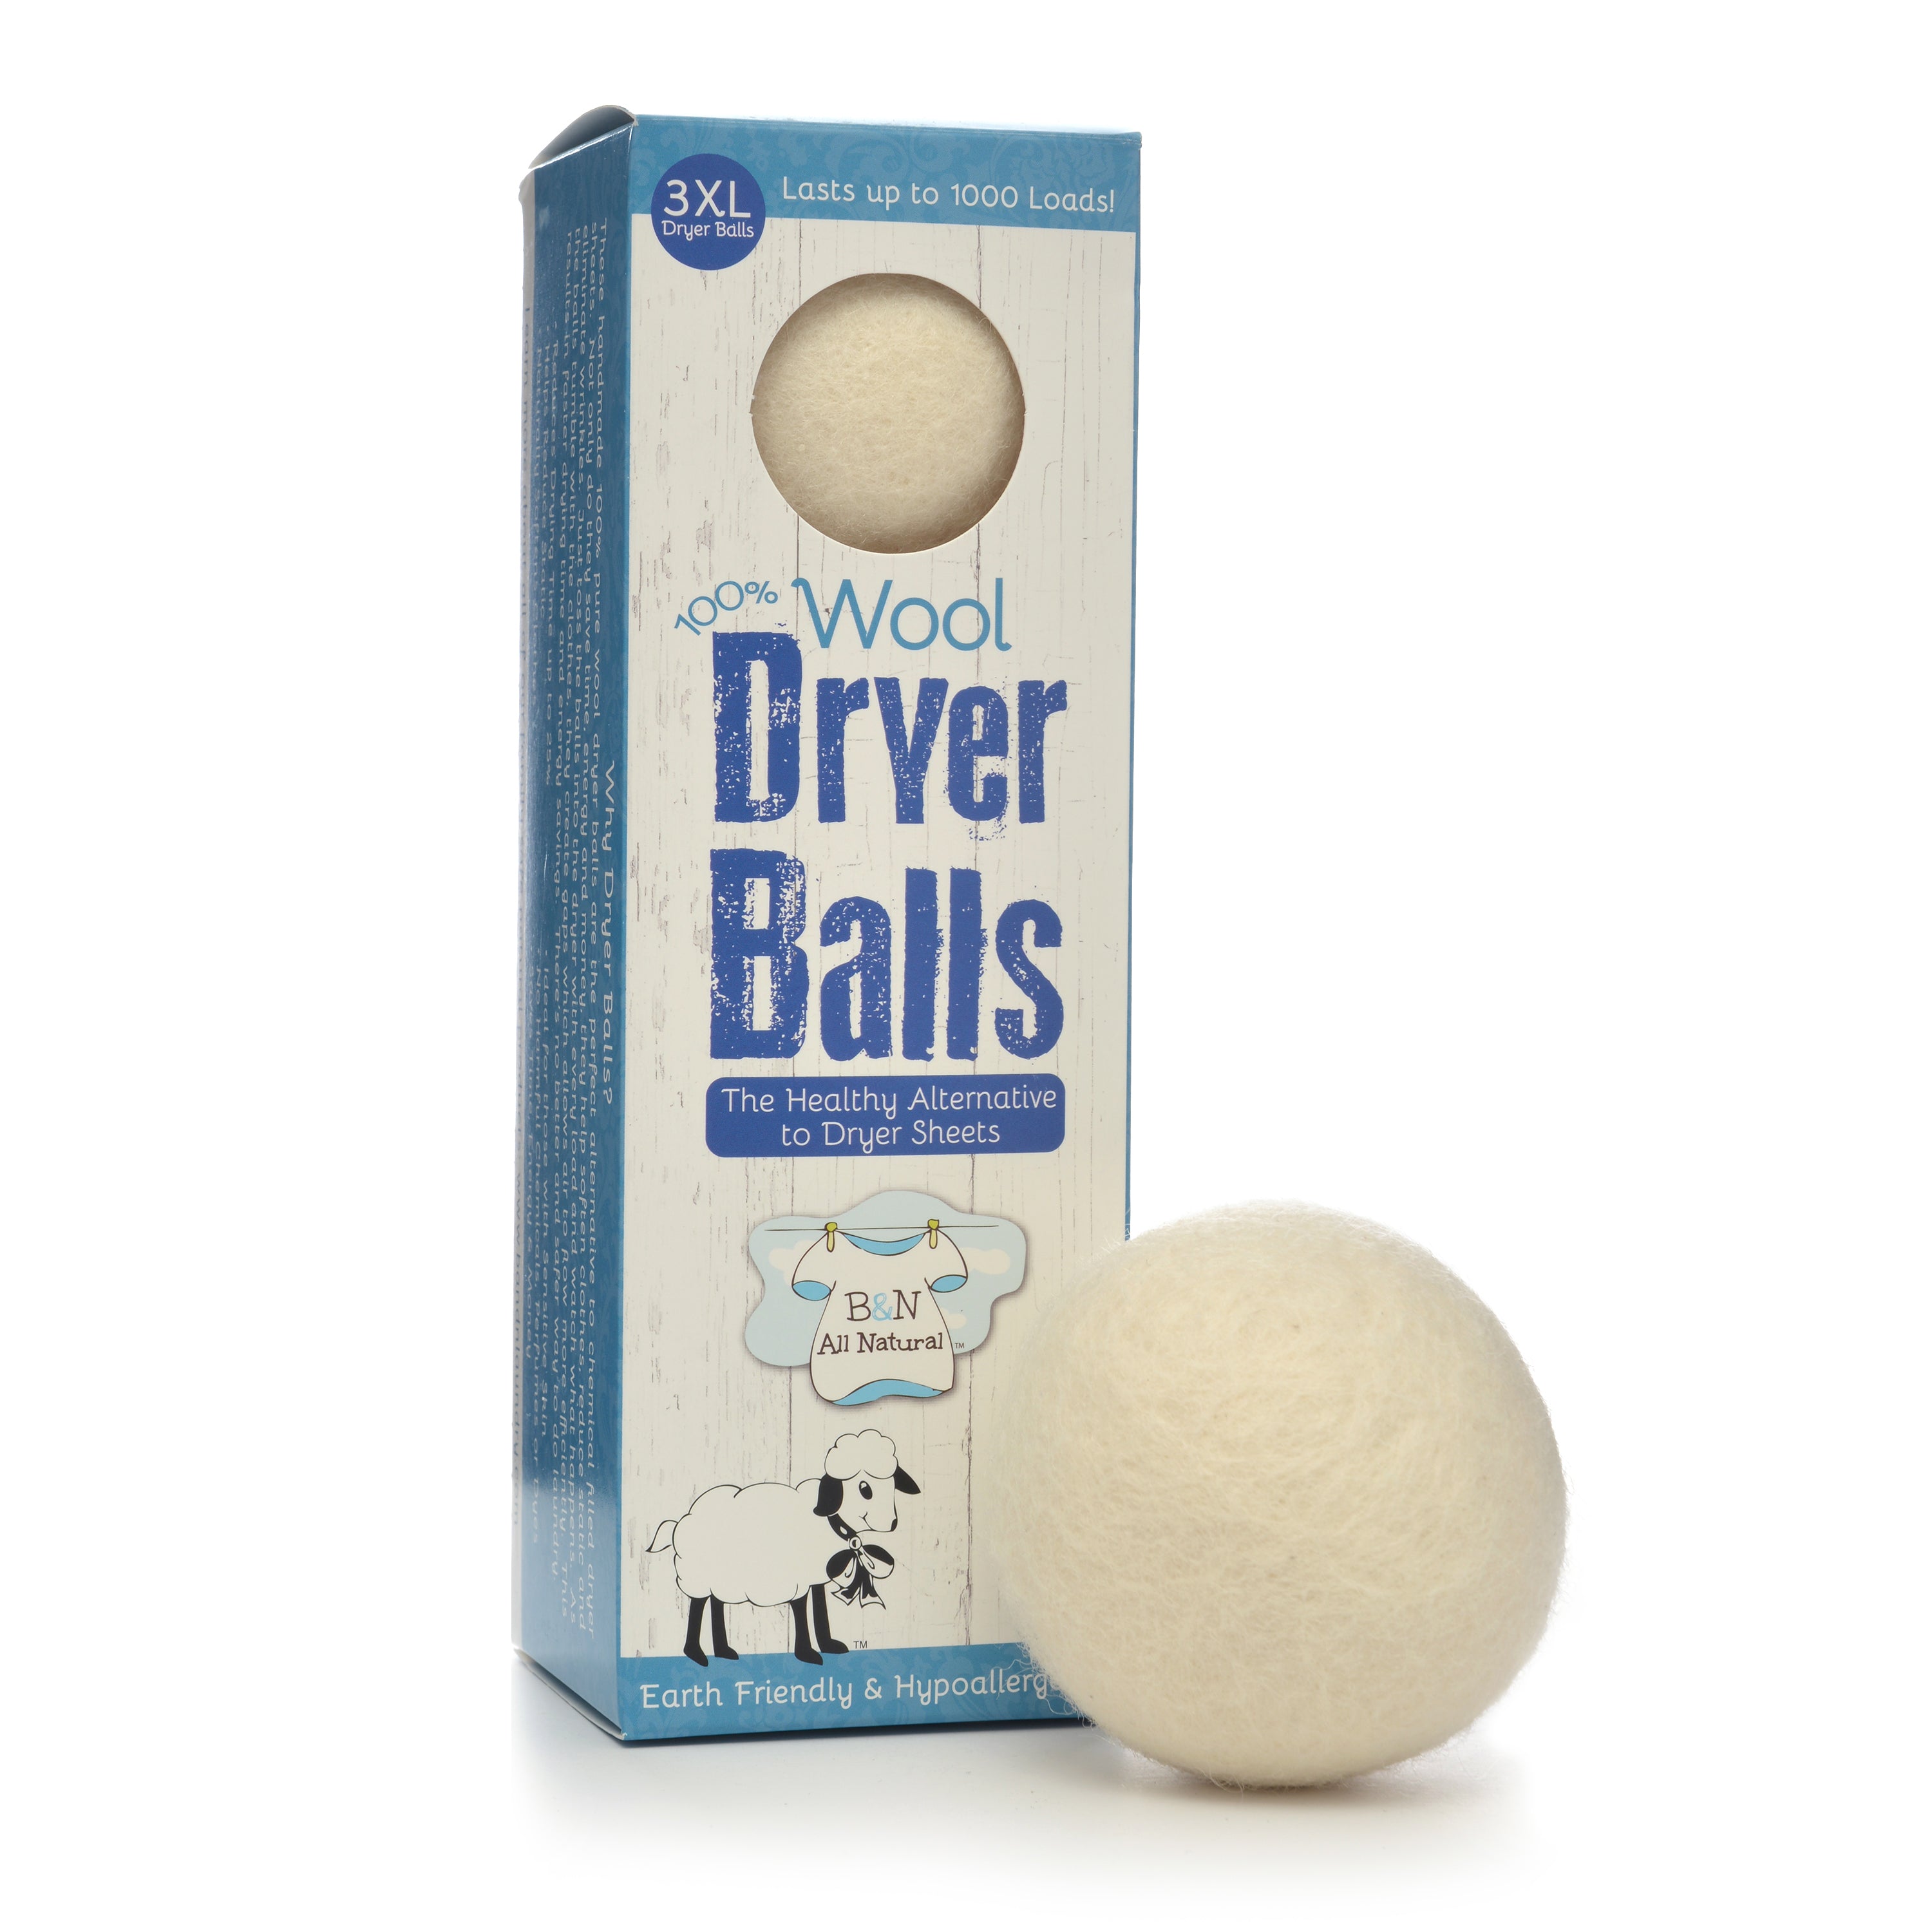 Clever uses for cotton wool balls - Silversurfers